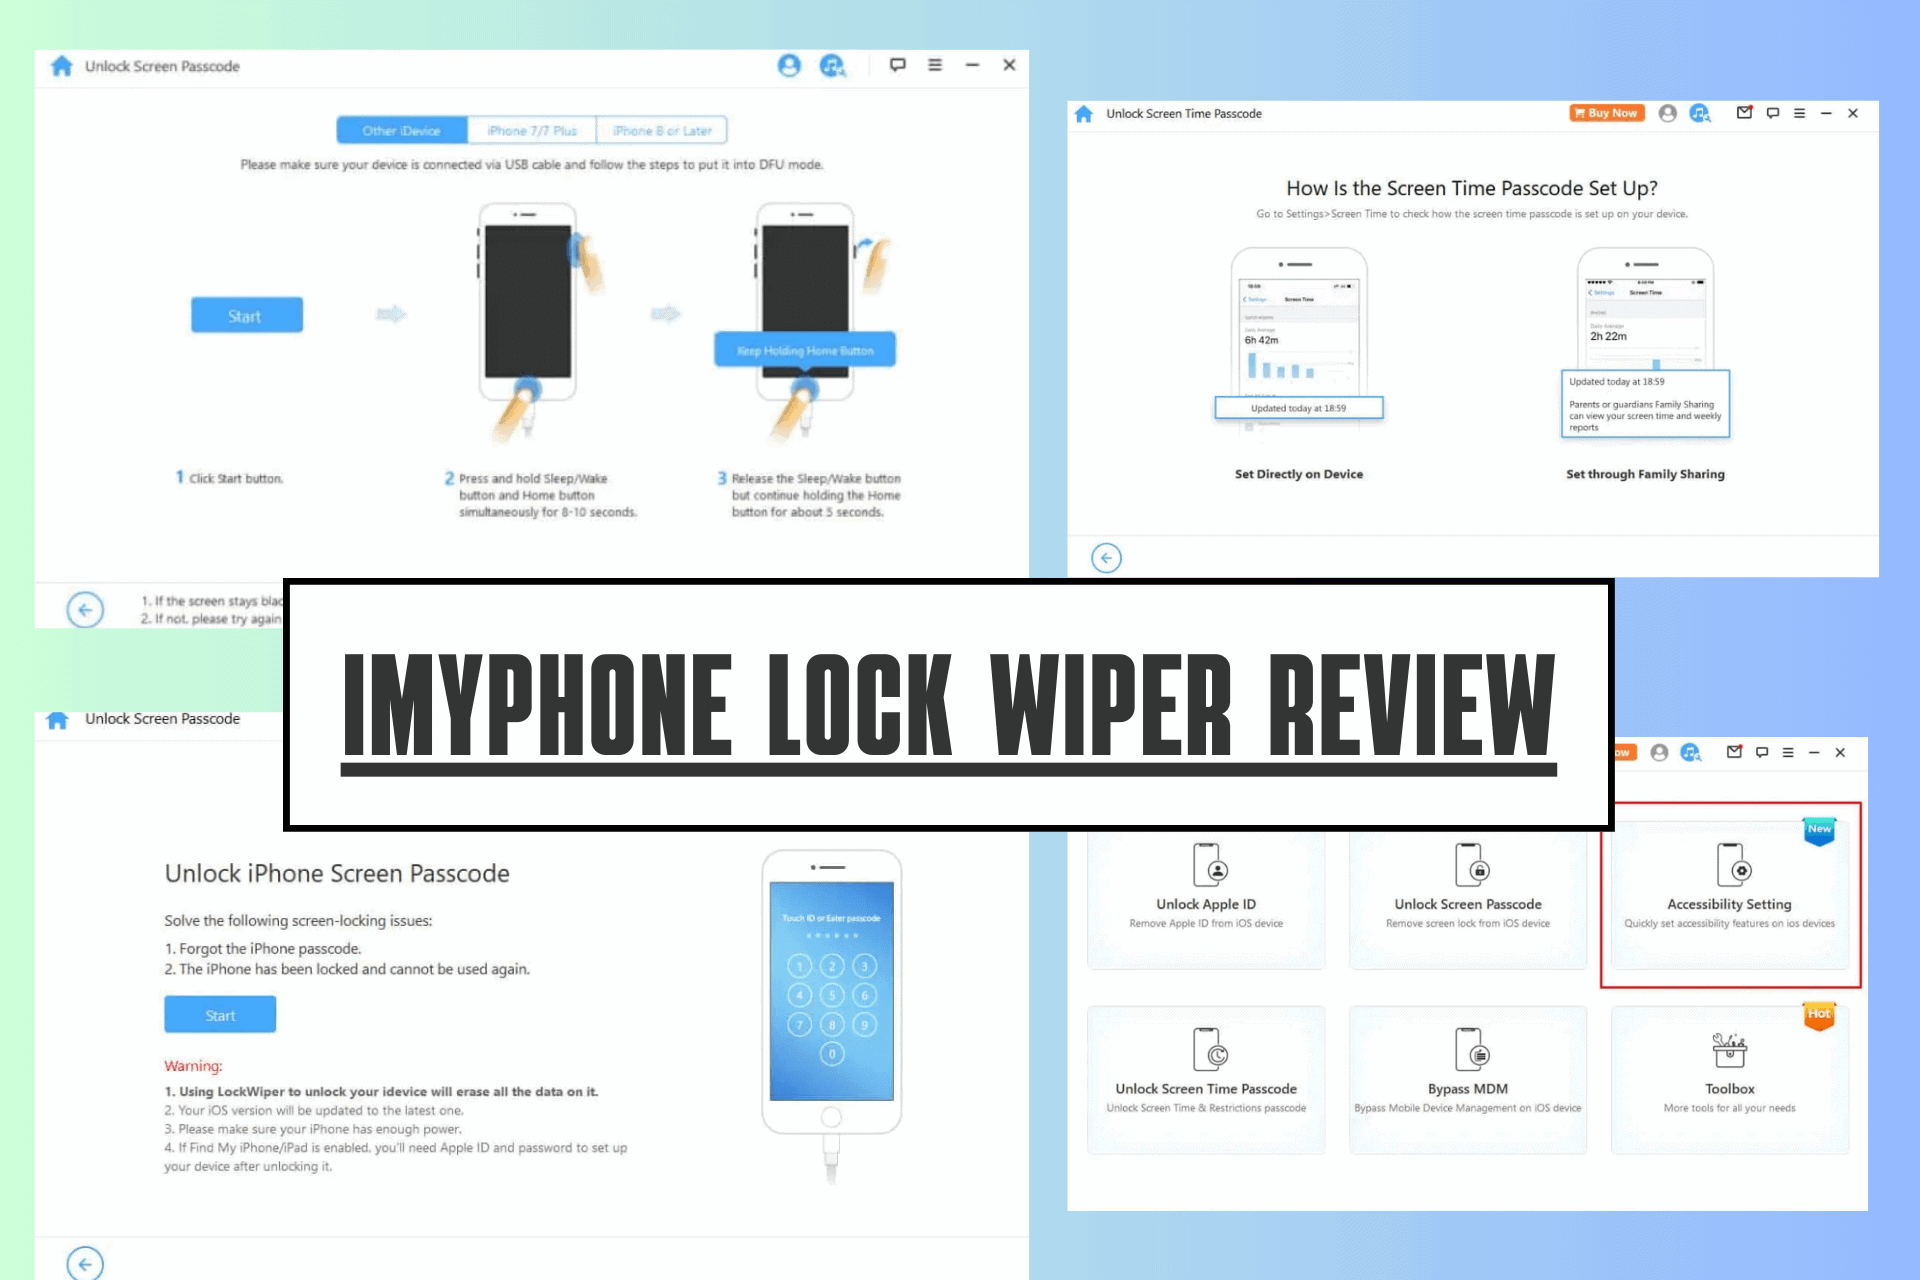 iMyFone LockWiper Review: How Good is It?